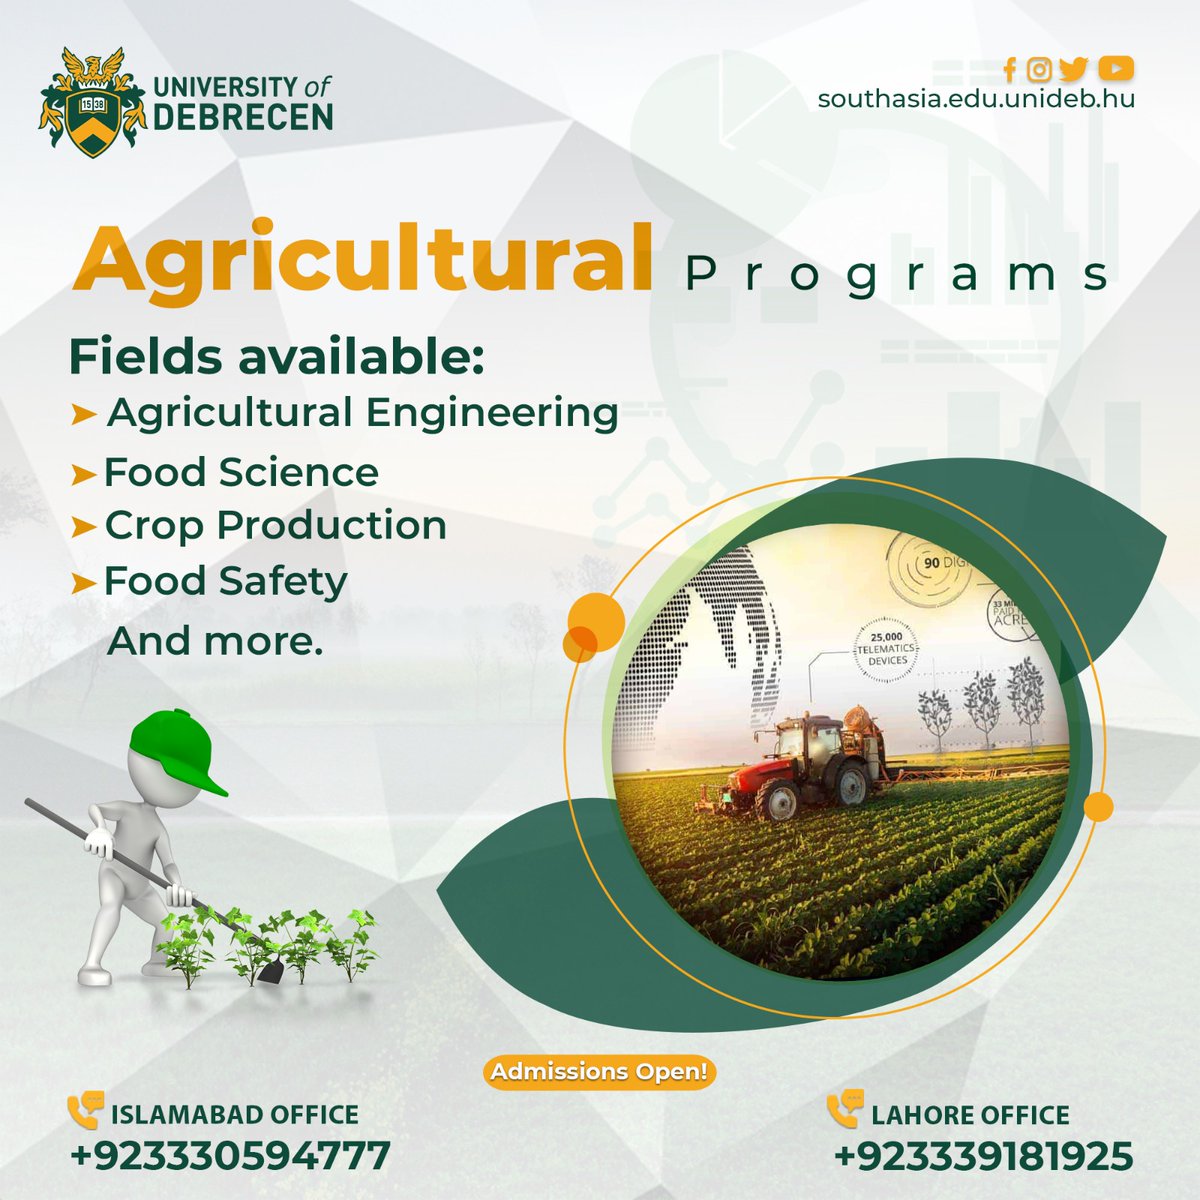 Offering a range of undergraduate, graduate, and doctoral programs, the University of Debrecen helps you learn all the modern methodologies when it comes to agriculture. 
Contact us at the regional office to learn more.
#agriculture #agriculturalengineering #studyabroad #study